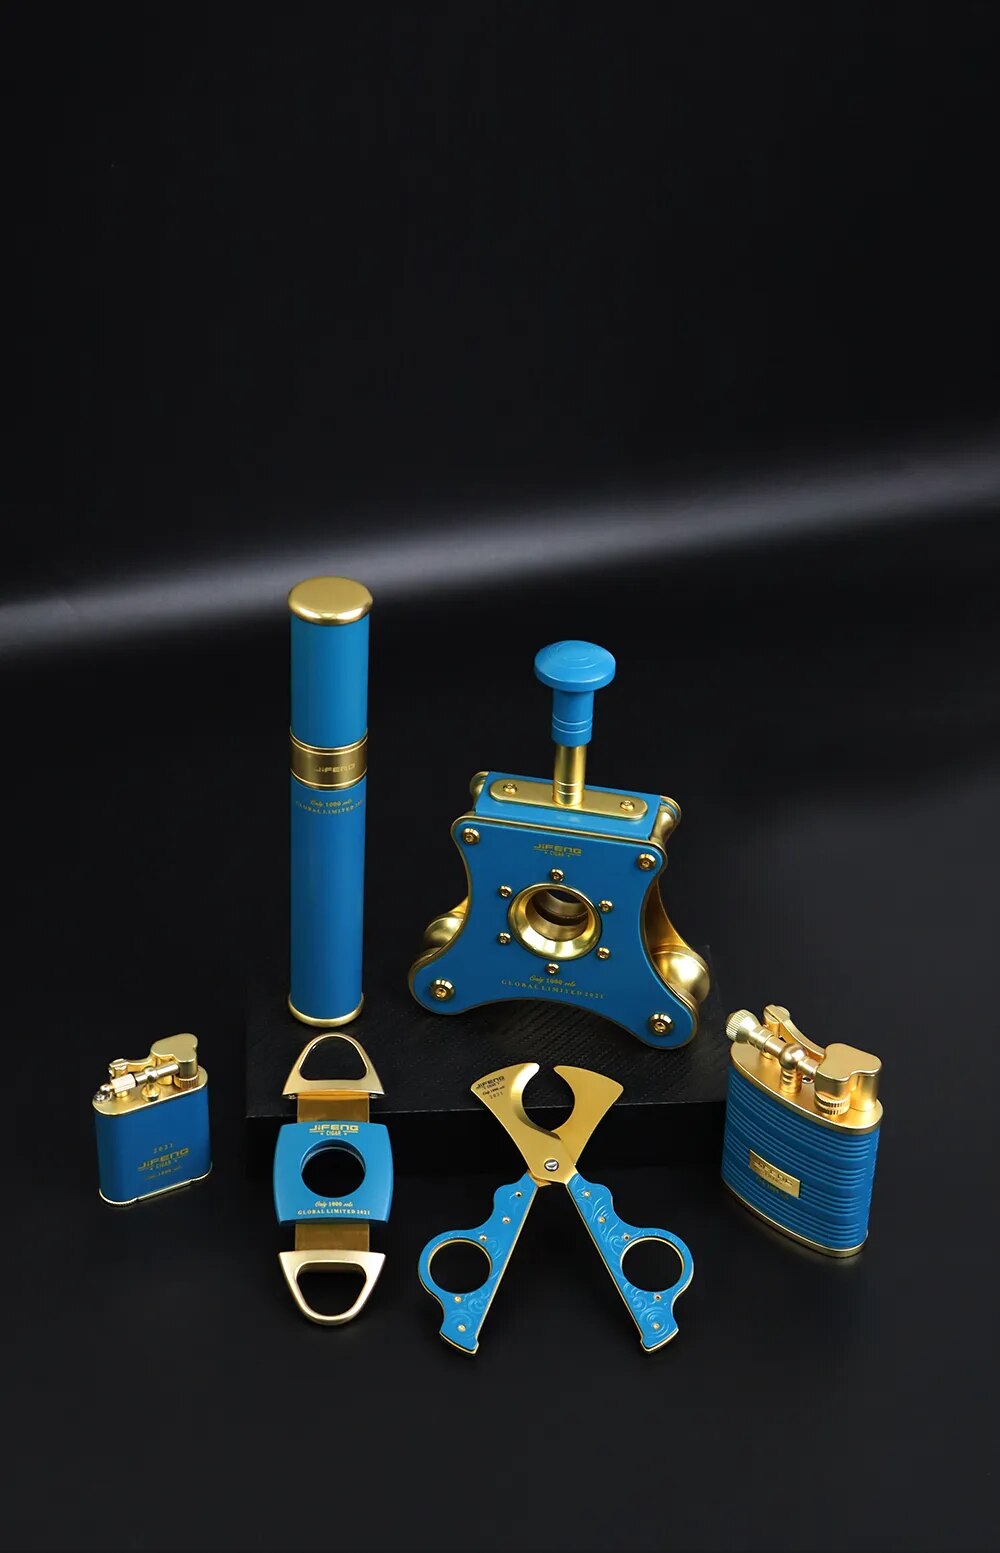 ALDO Smoking Accessories > Ashtrays Collectible Luxury Exlusive Special Limited Edition of Cigar Tool Sets with Gift Box Red Black and Blue